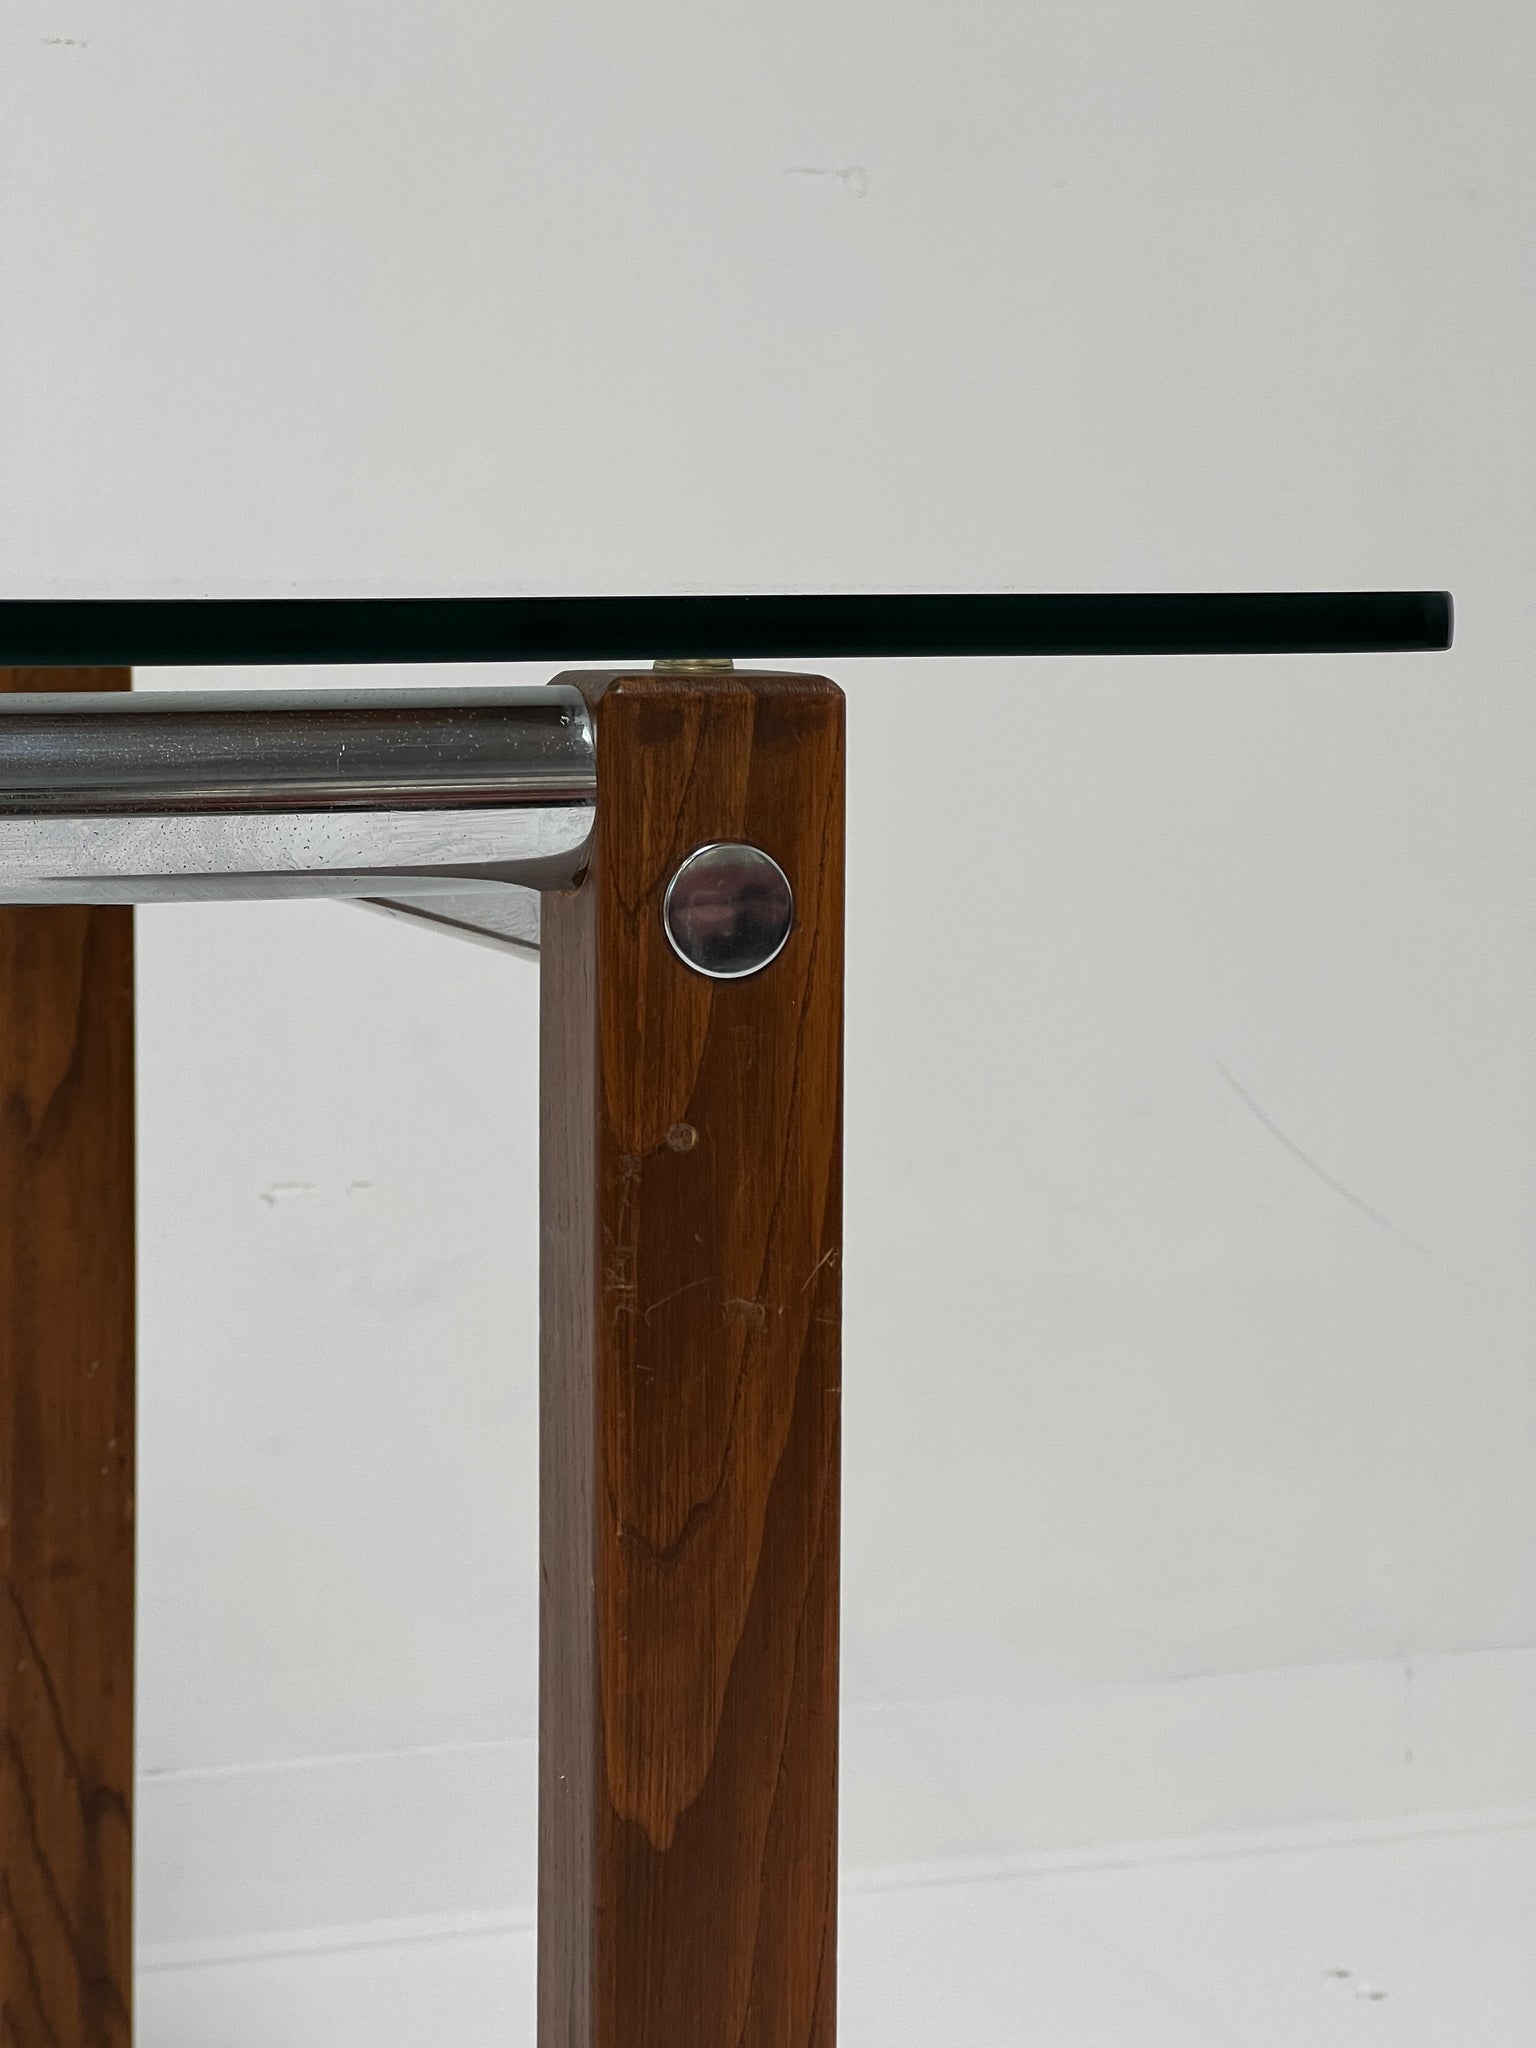 Mid Century Wood Dining Table with Chrome Detail